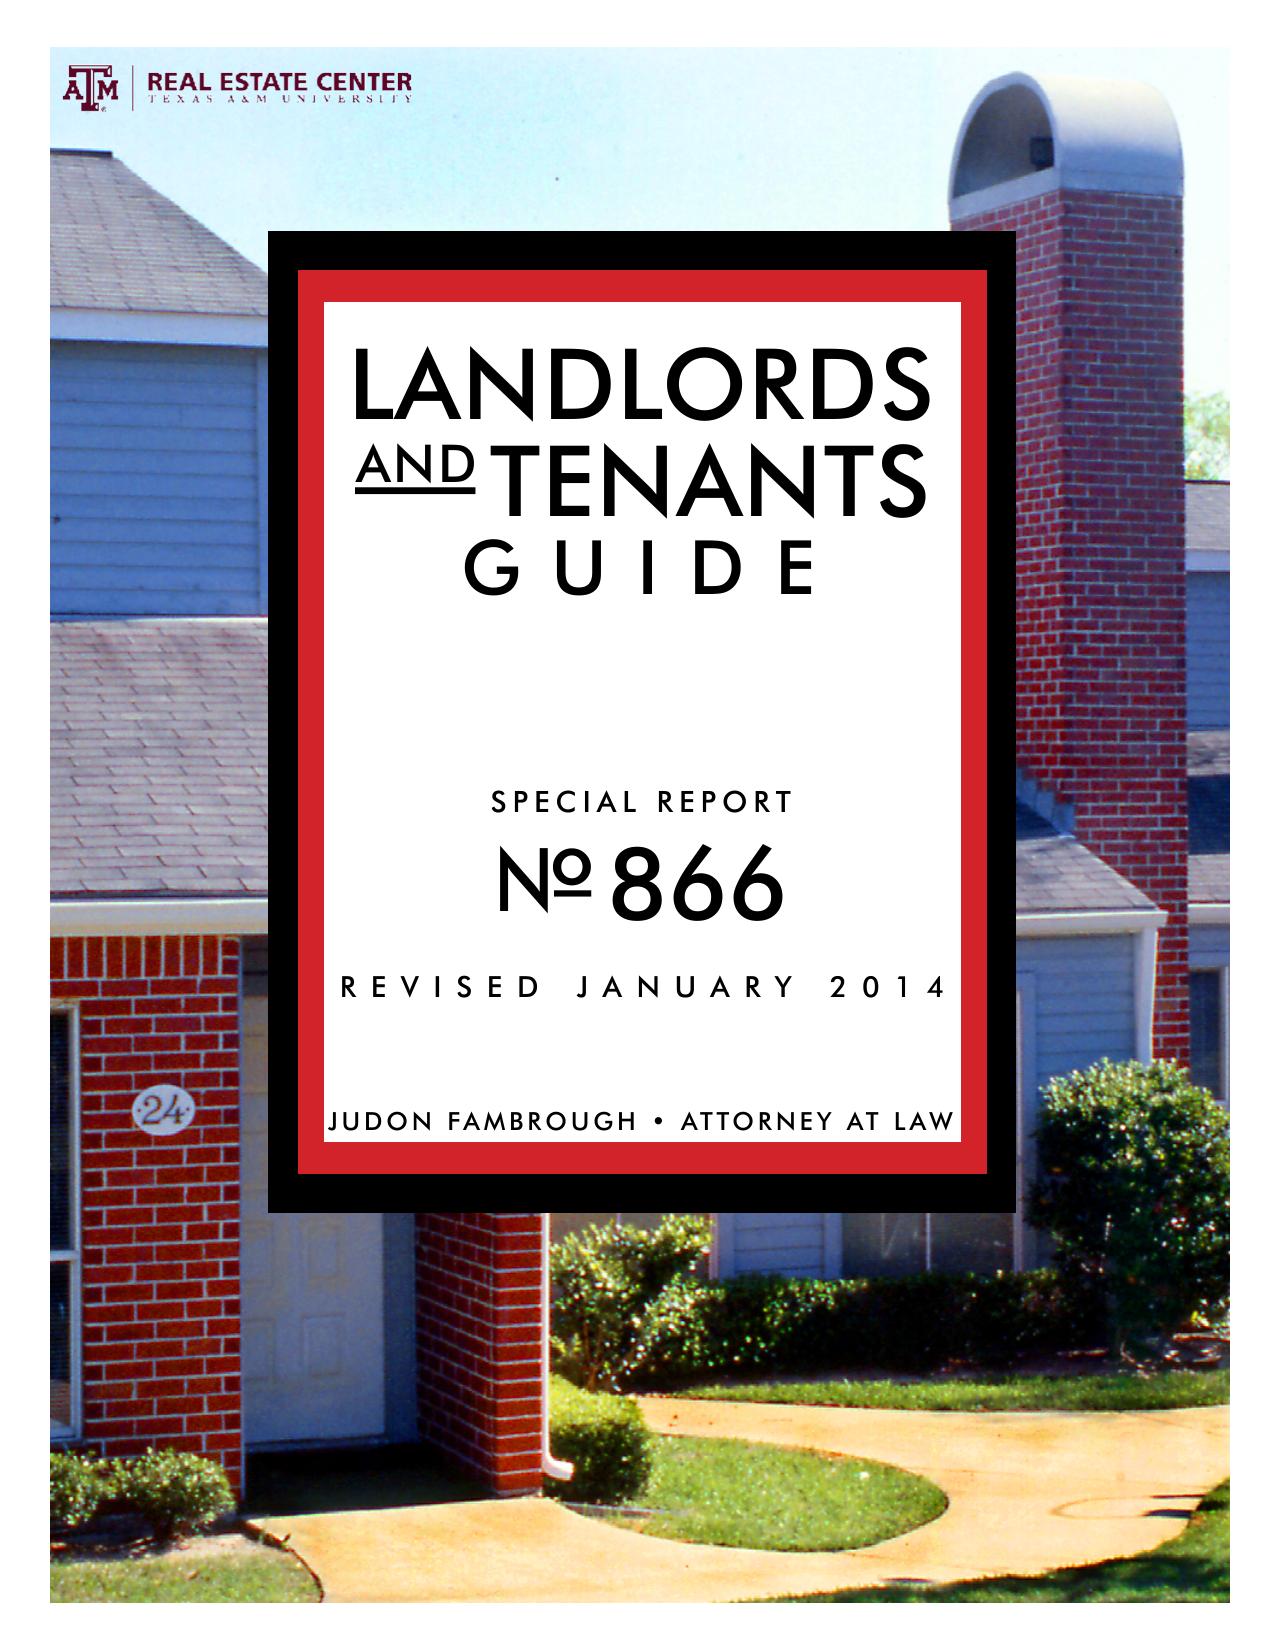 Landlords and Tenants Guide